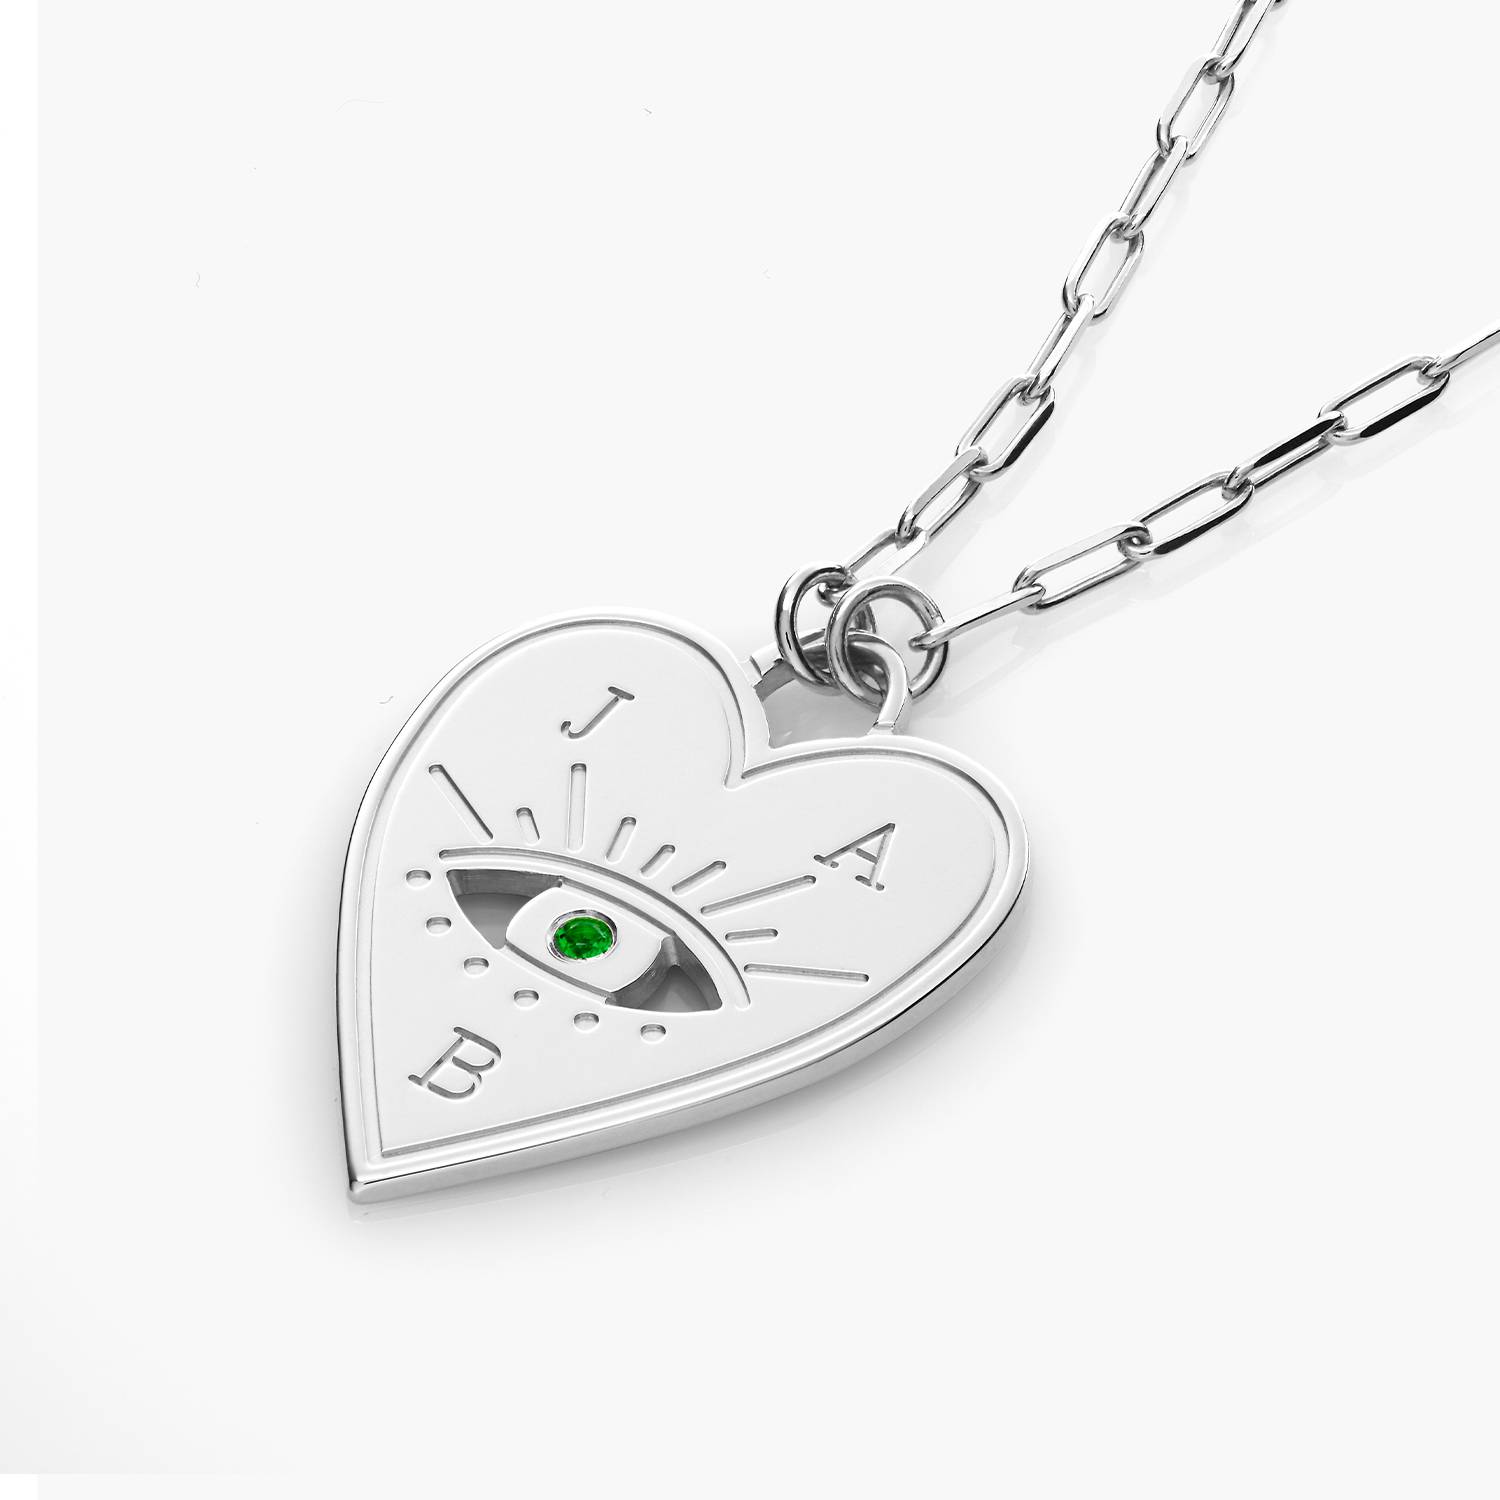 Engraved Evil Eye Heart Necklace with Cubic Zirconia - Silver product photo